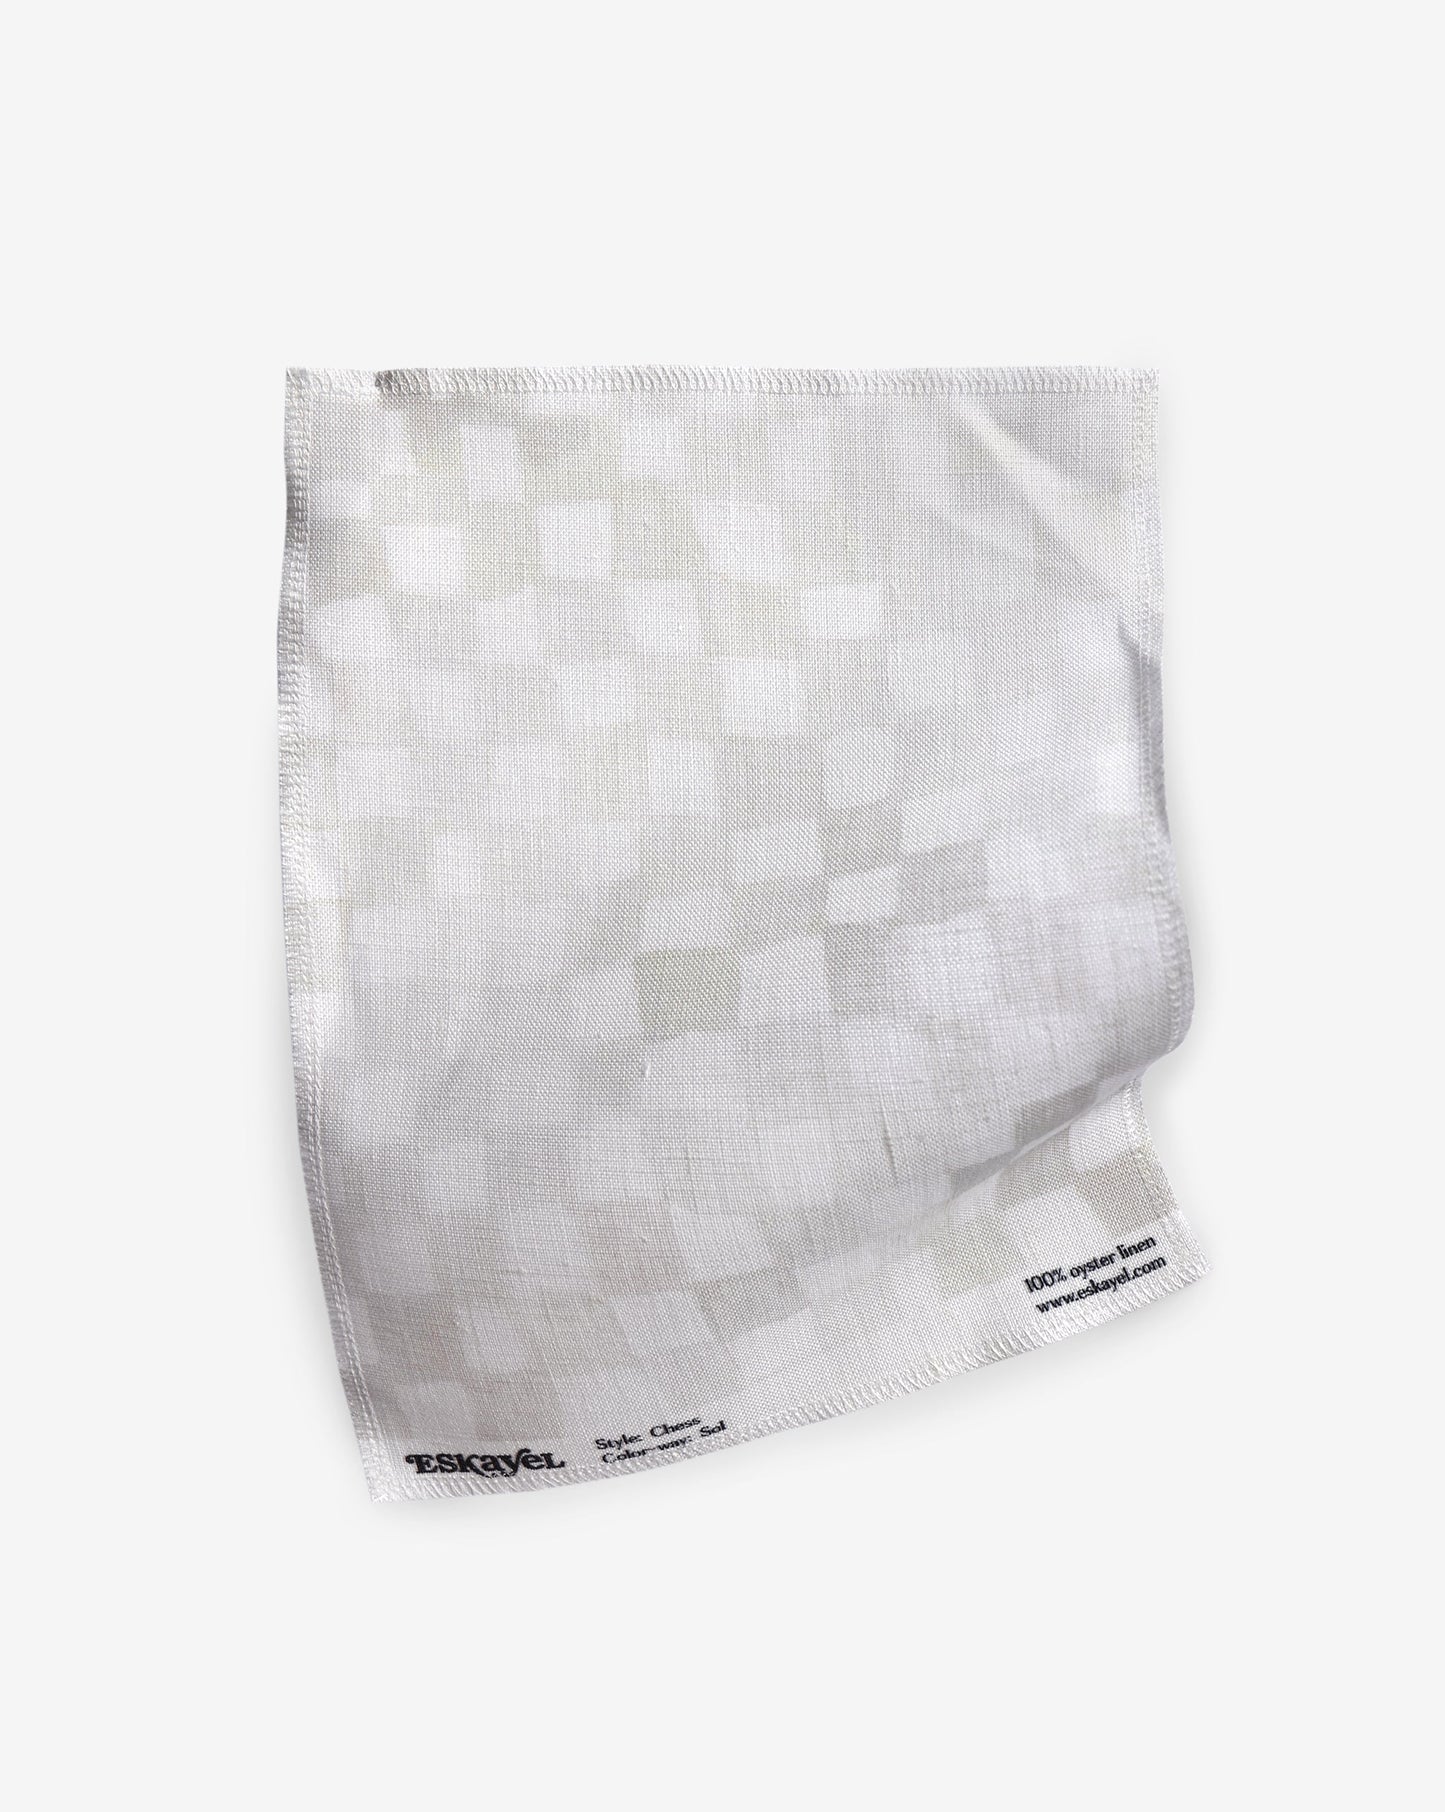 A white Chess Fabric Sol fabric with a checkered pattern motif